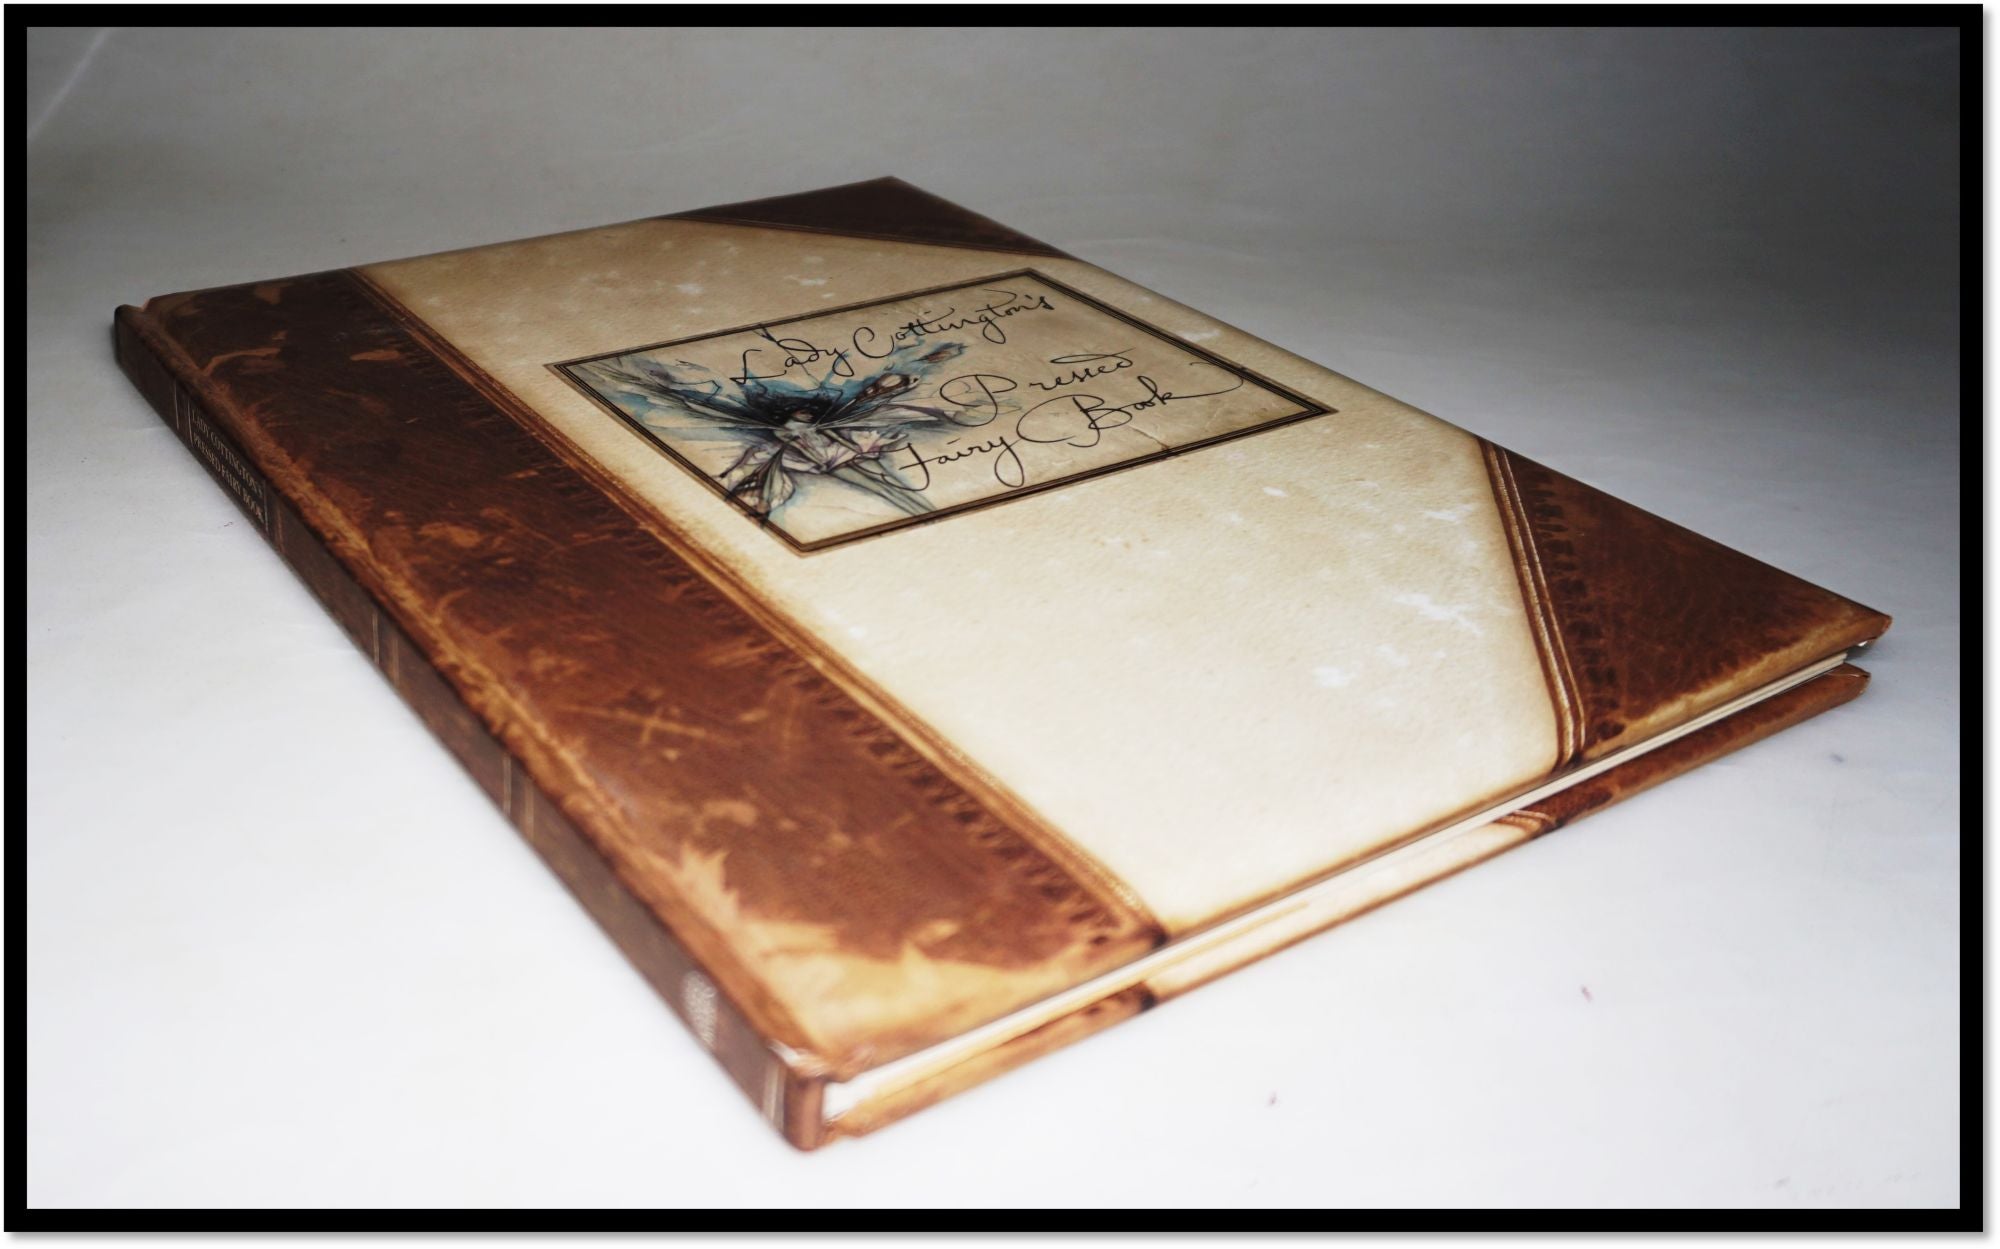 Lady Cottington's Pressed Fairy Book by Terry Jones on Blind Horse Books